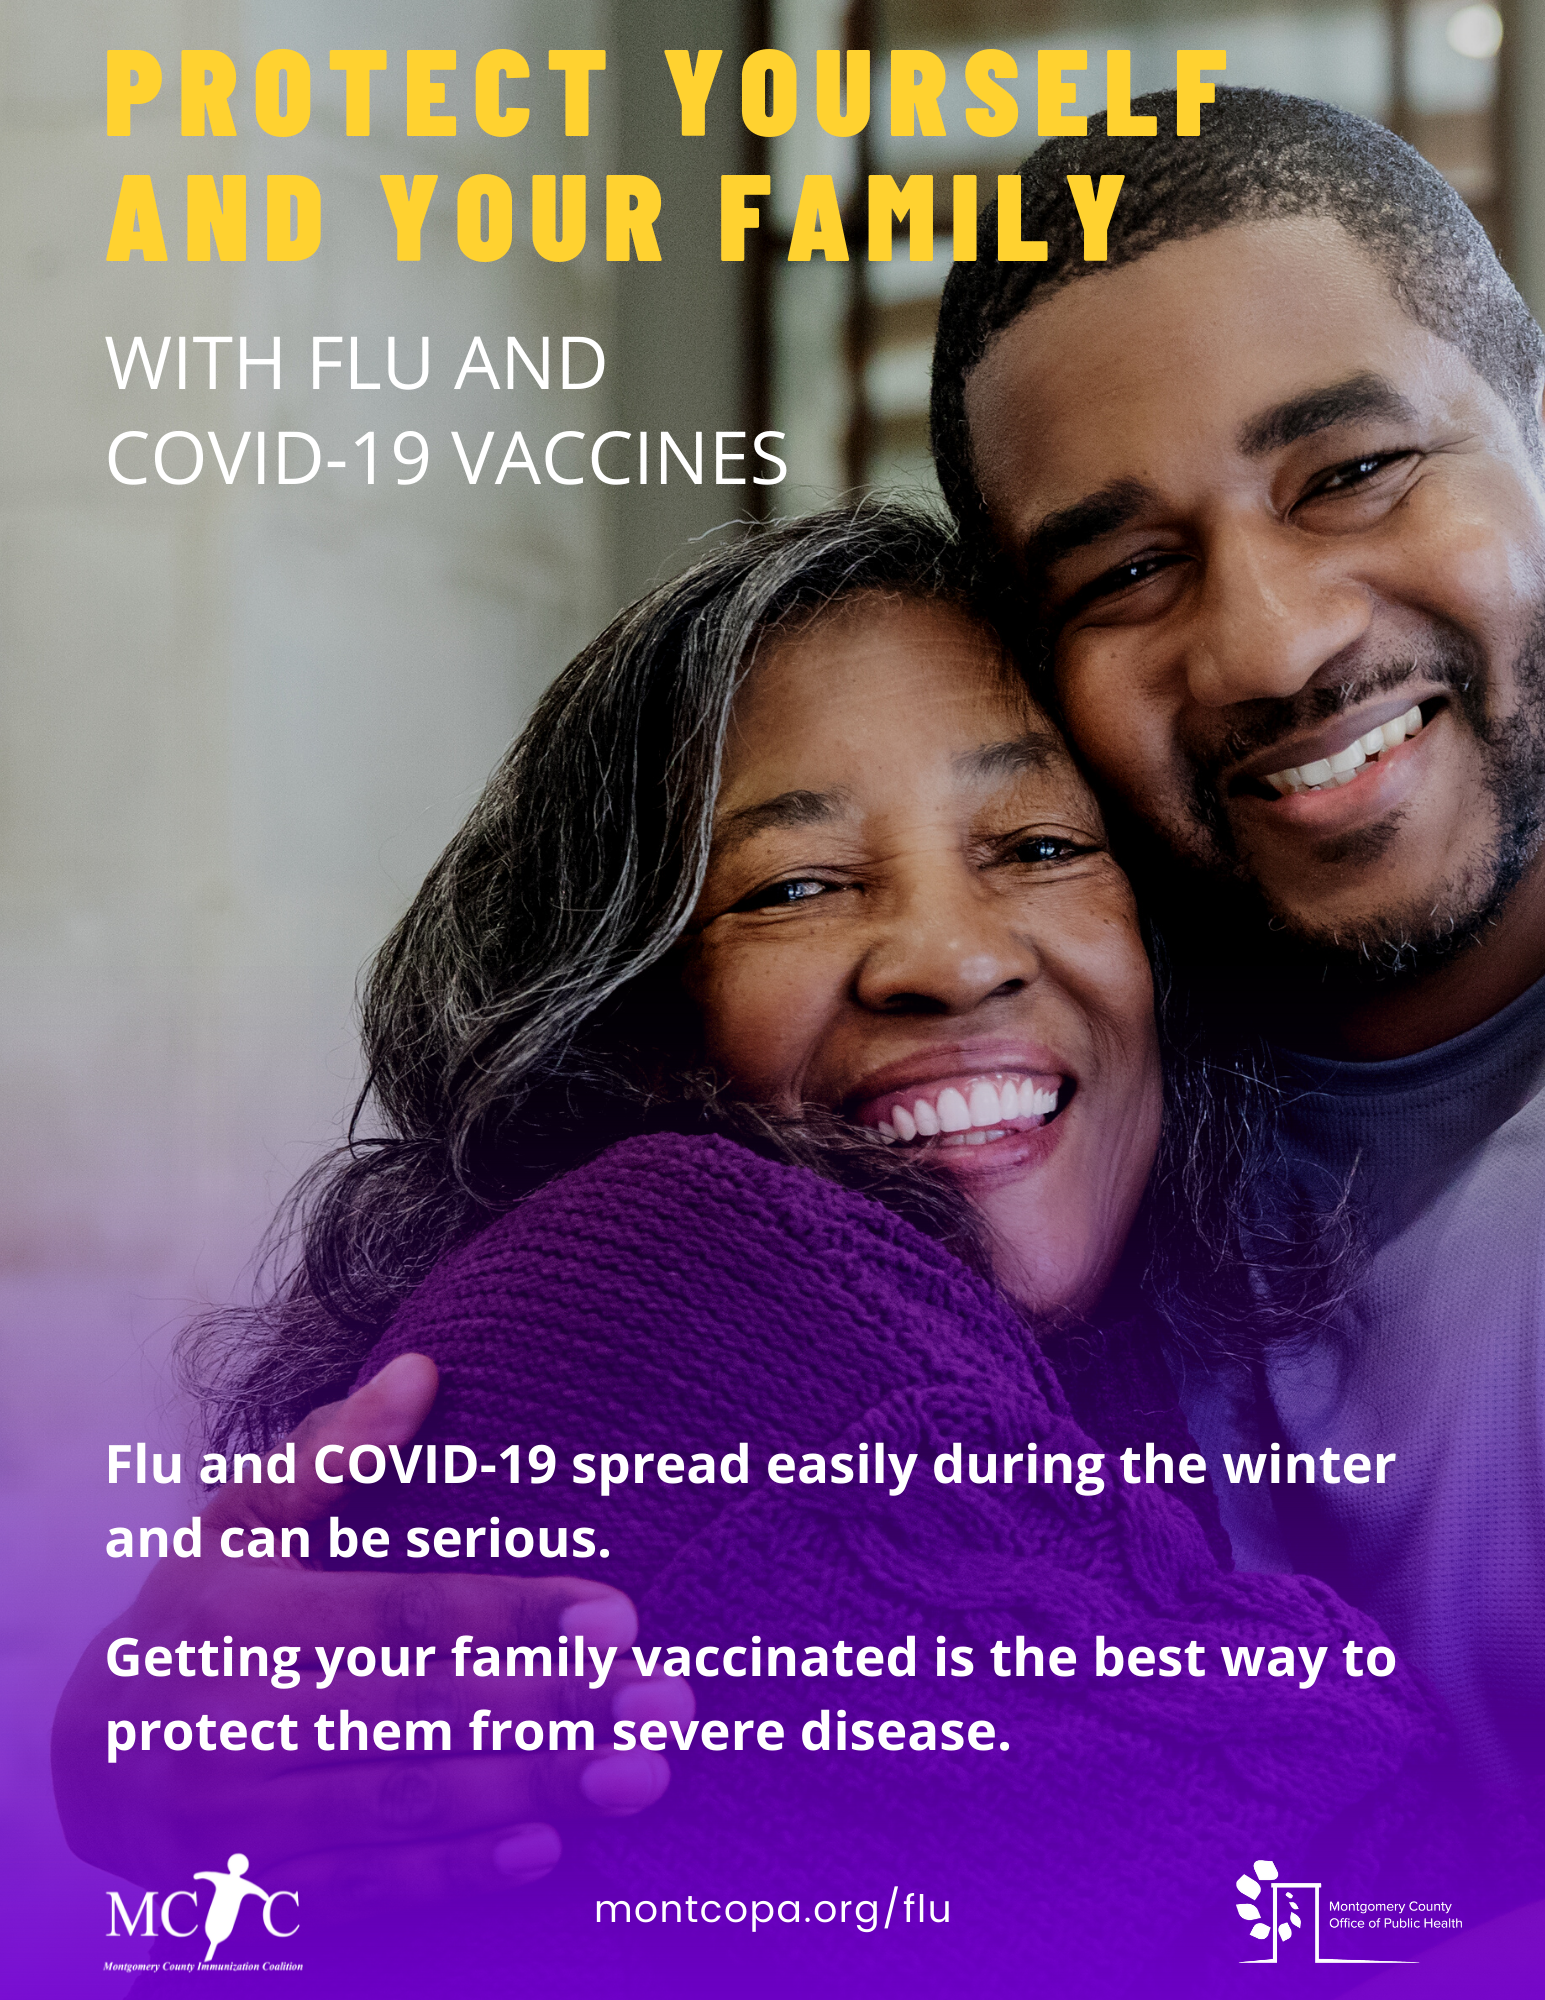 A Black mother and son embrace and smile. Text reads, "Protect yourself and your family with flu and covid-19 vaccines. Flu and COVID-19 spread easily during the winter and can be serious. Getting your family vaccinated is the best way to protect them from severe disease."